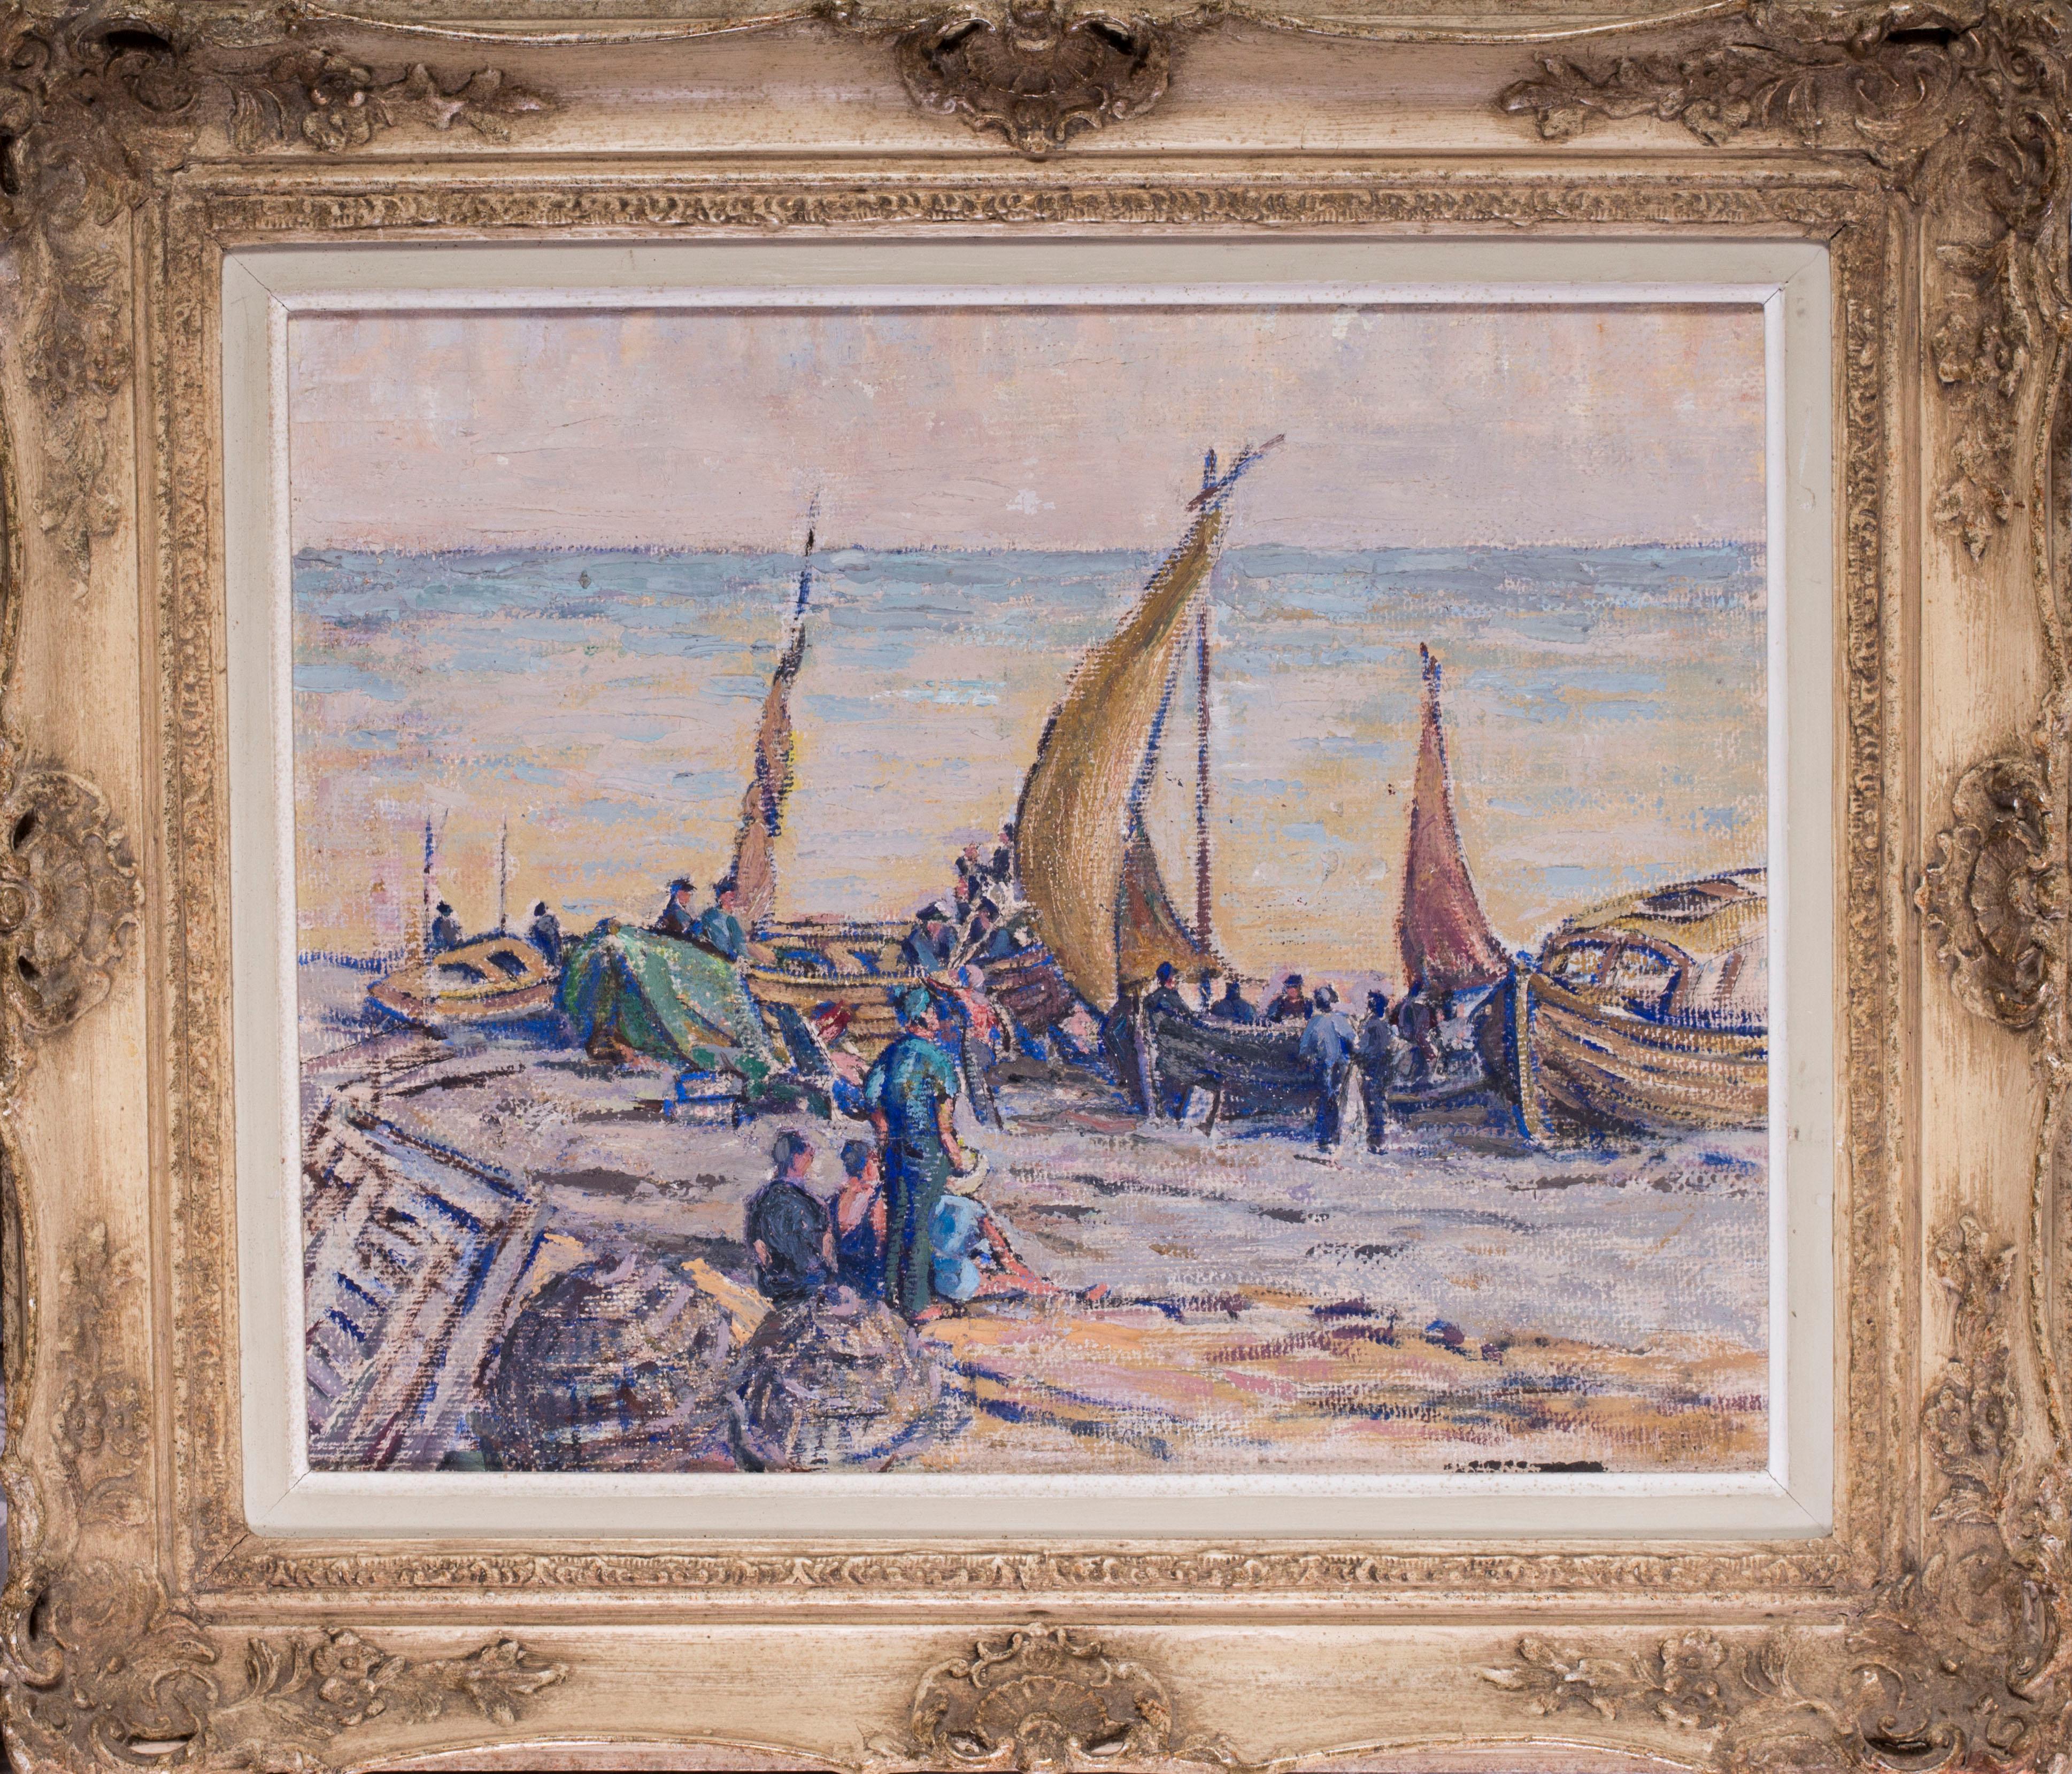 A British 20th Century Post Impressionist oil painting of boats on the seashore - Post-Impressionist Painting by Philip Naviasky